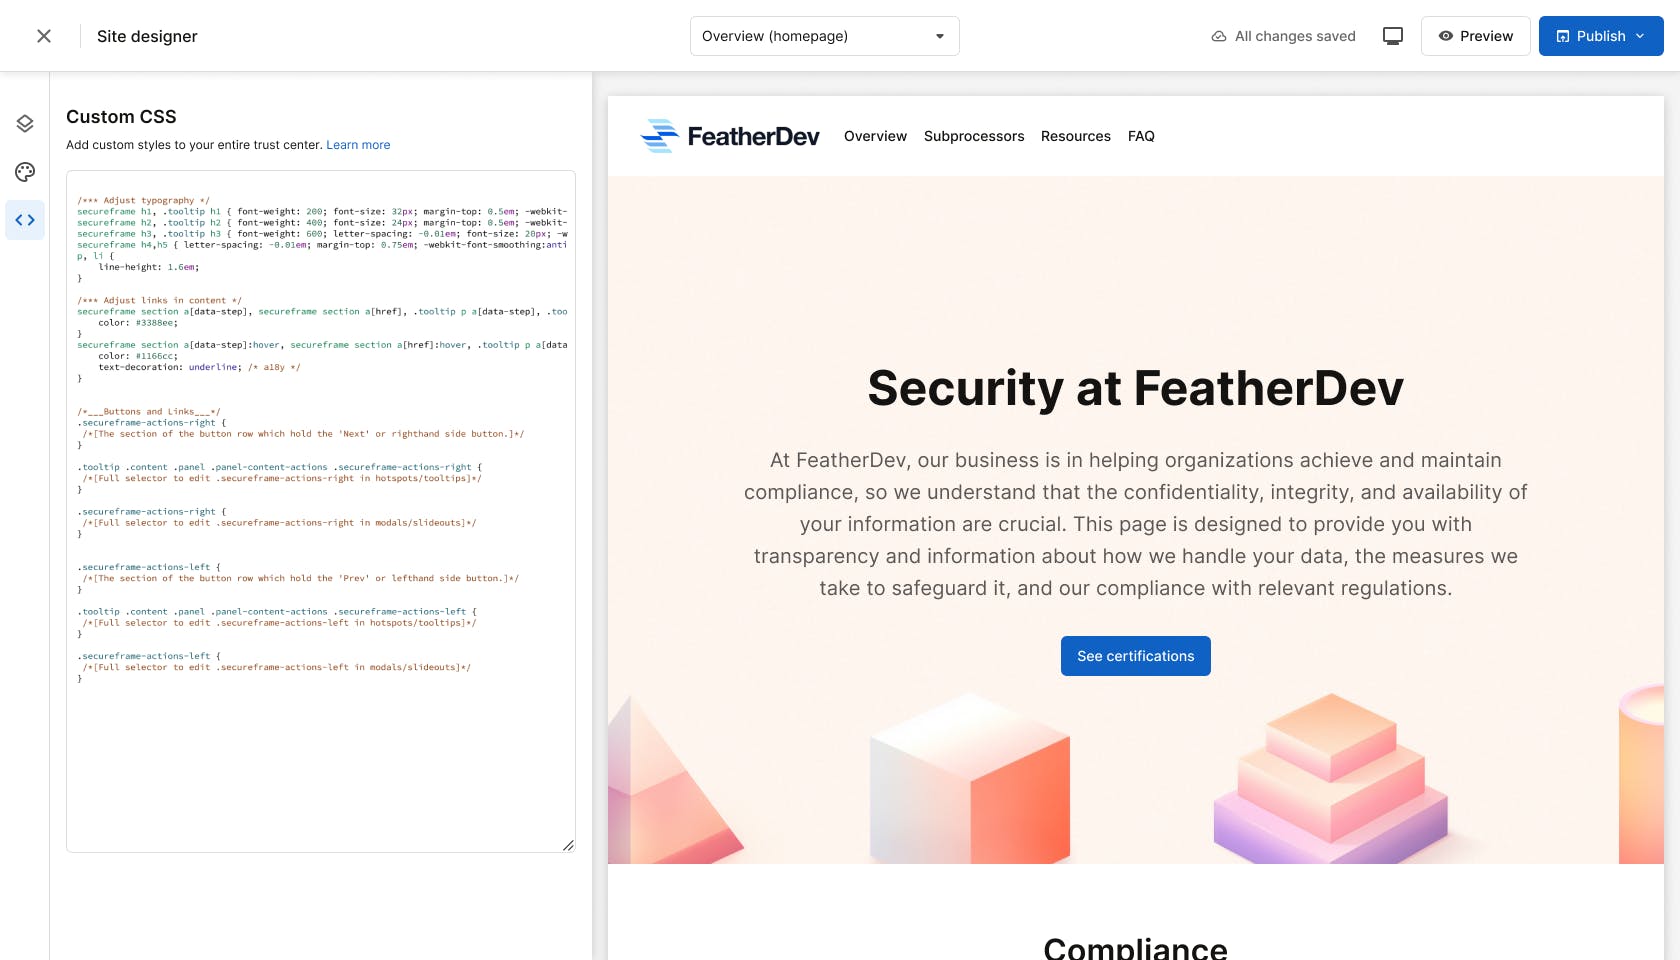 FeatherDev user customizing their Trust Center page with custom CSS